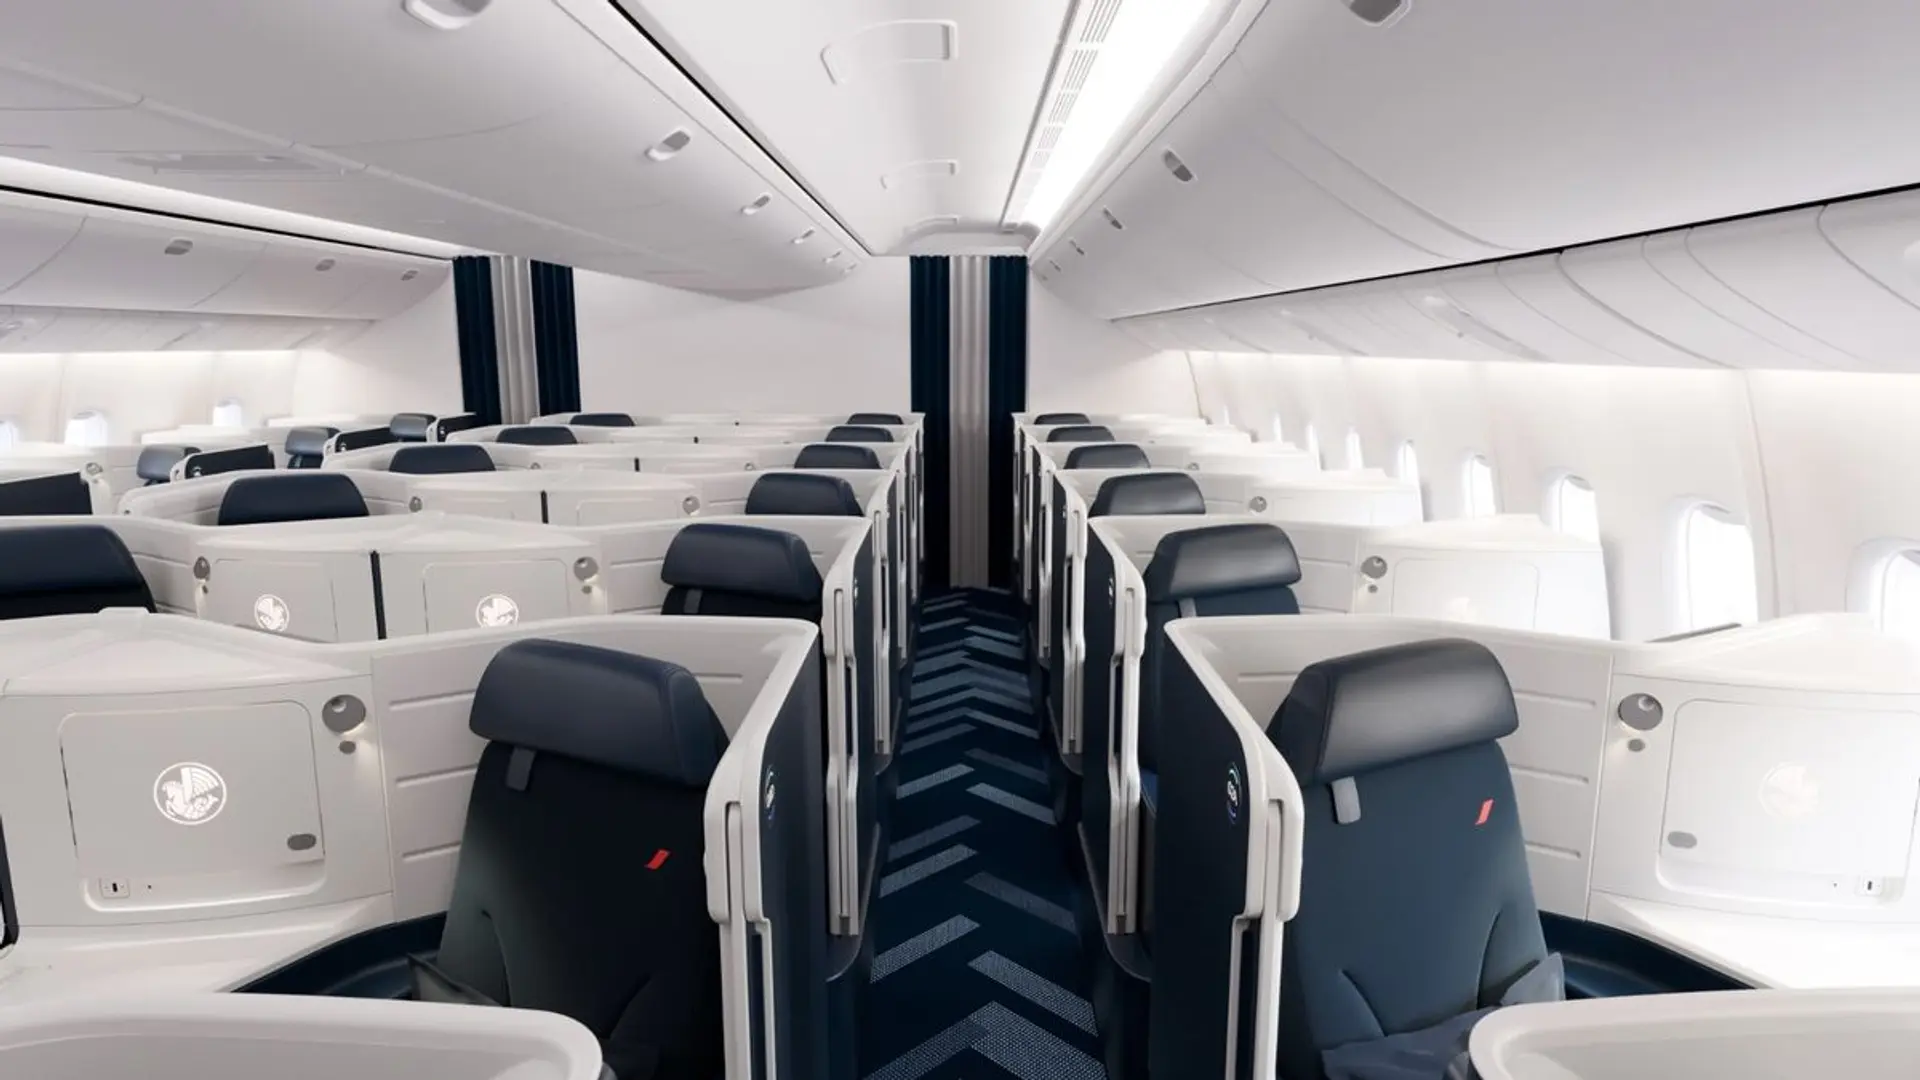 Airlines News - Air France unveils new Boeing 777 Business Class cabin 